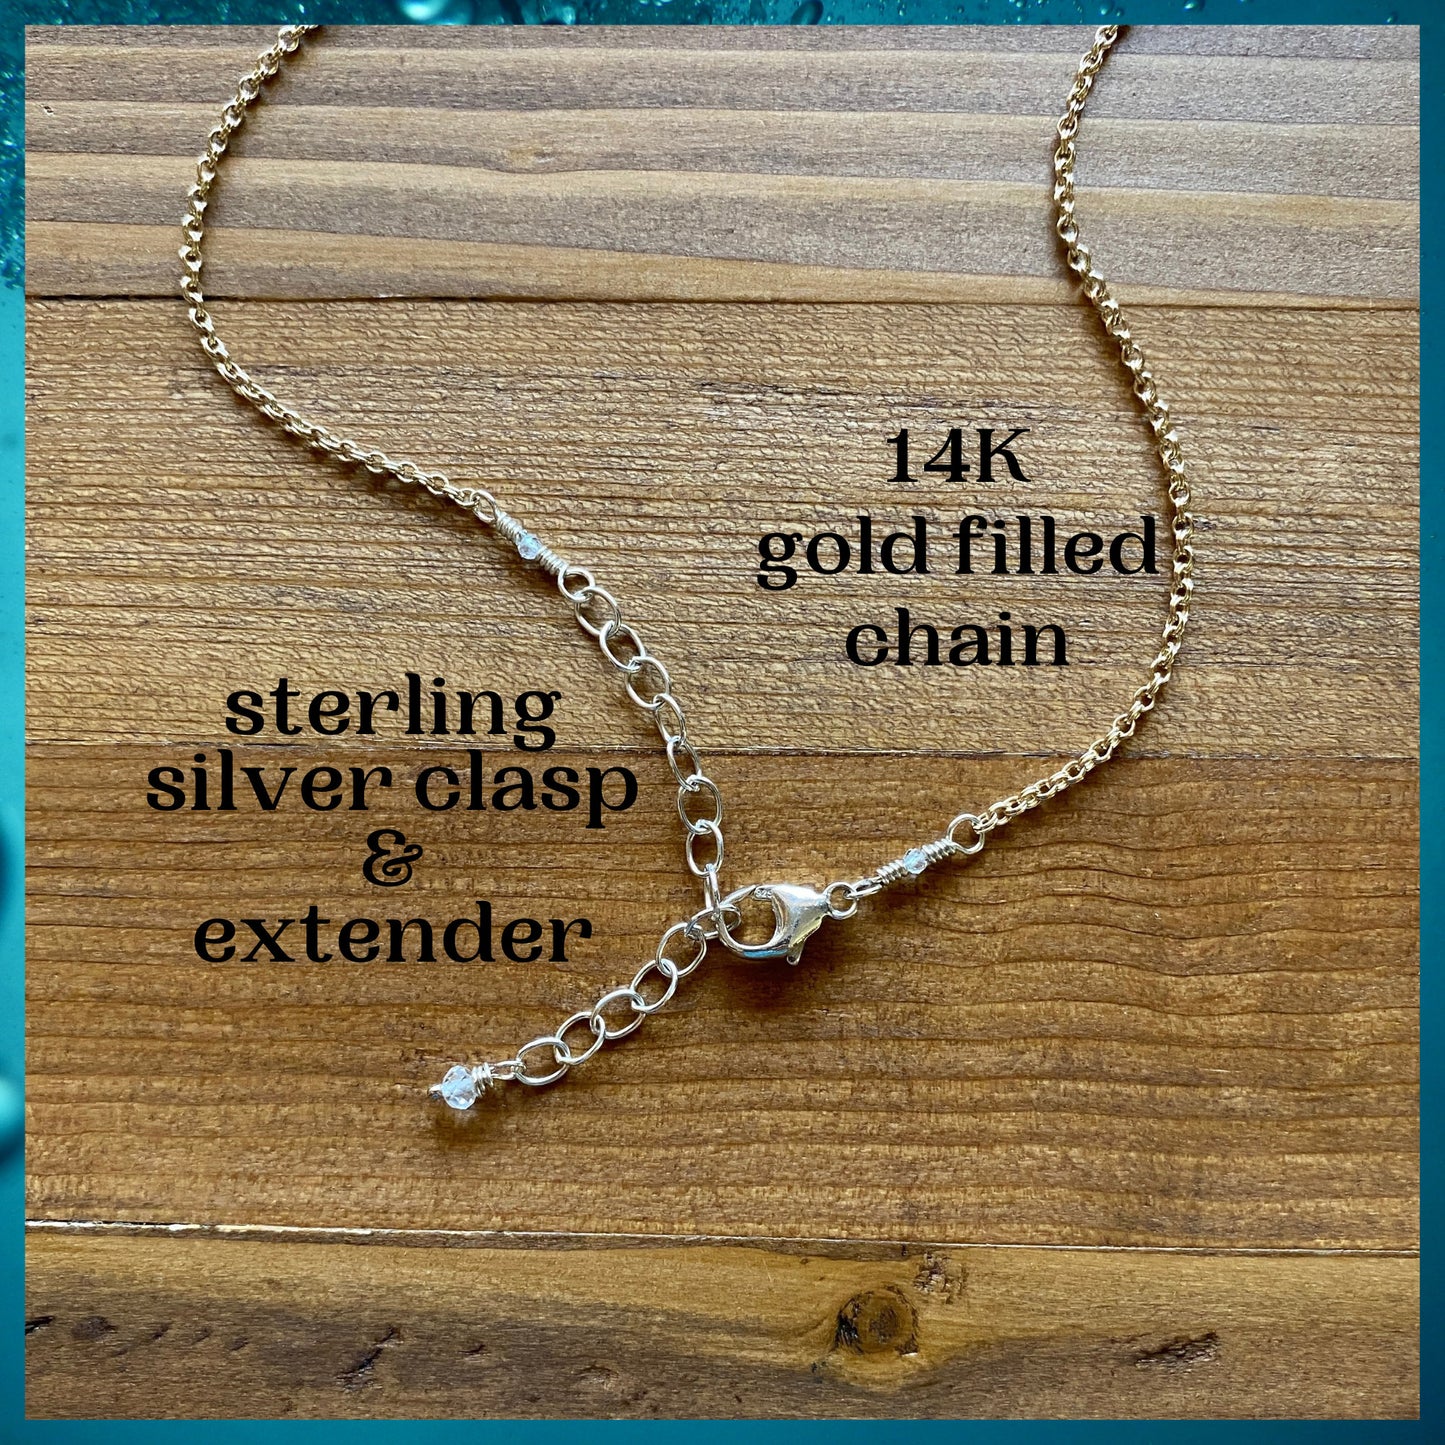 50th Mixed Metal Mid Size Milestone Birthday Necklace, Handcrafted Perfectly Imperfect Sterling Silver Sparkly Circles Pendant on Gold Chain